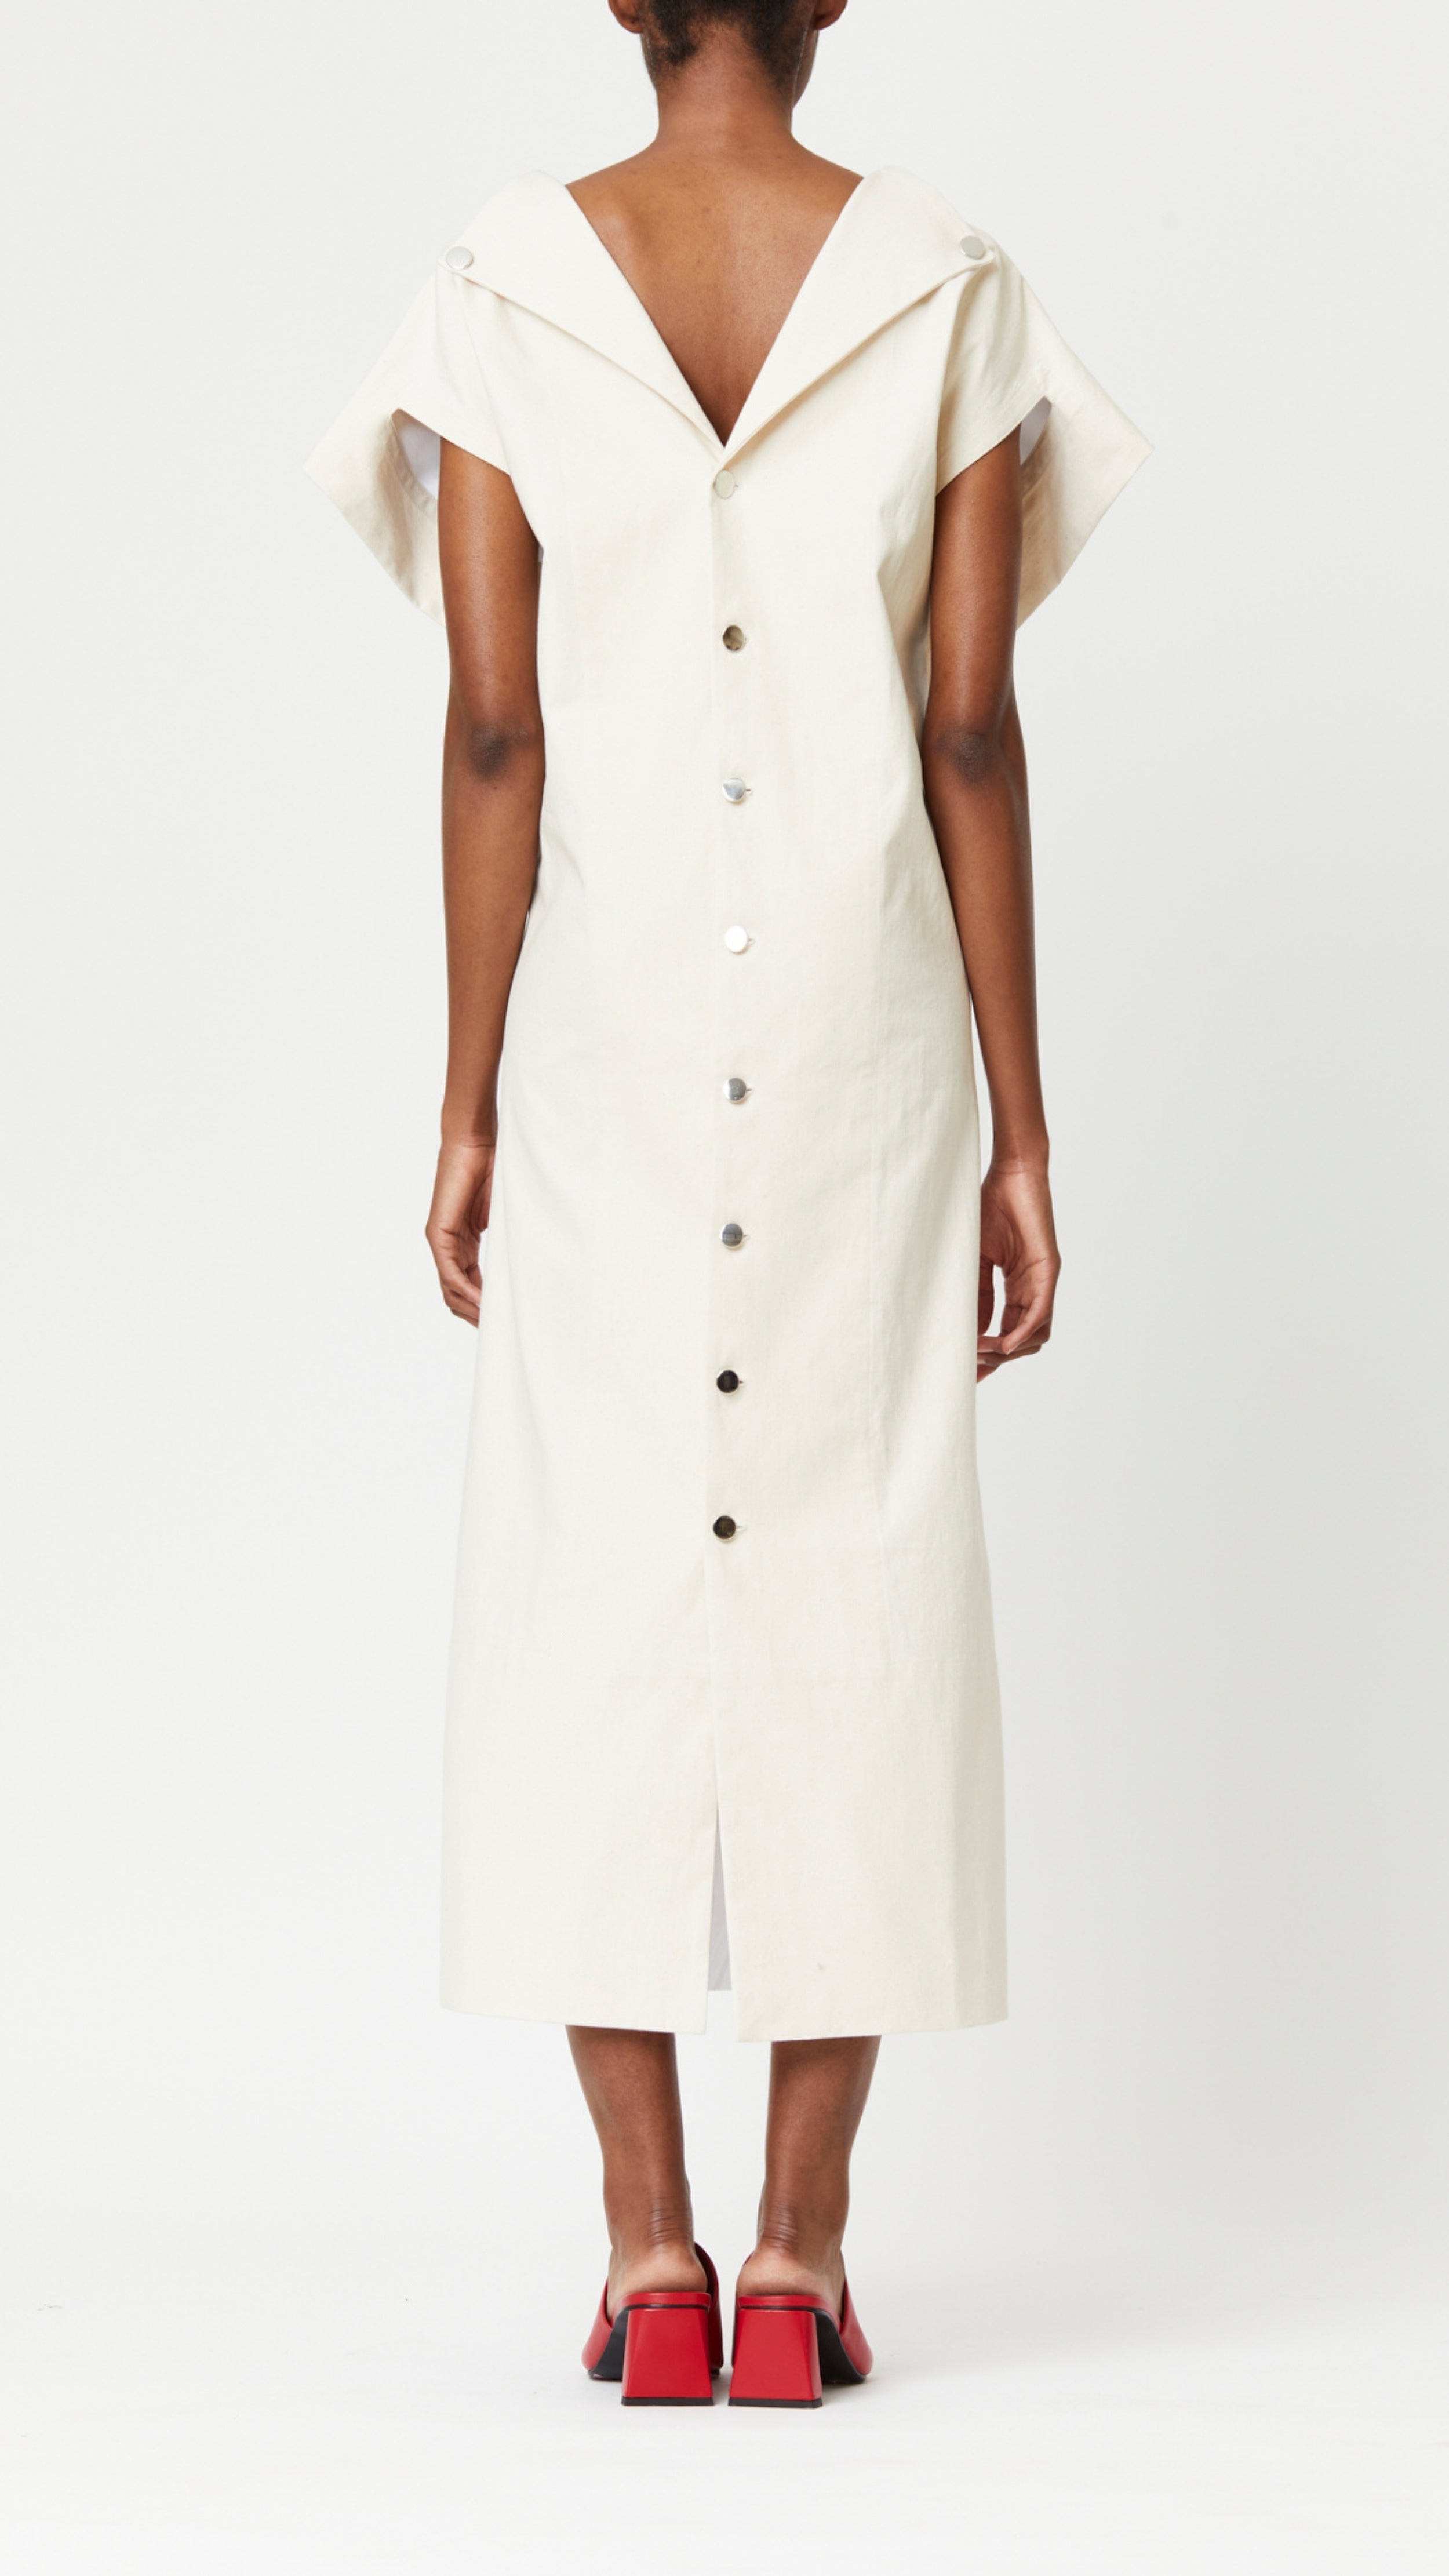 Plan C Smock Dress with Buttons in White & Calico. Summer dress. Smock dress with a front white panel over a soft calico interior. The front shoulder buttons create a dramatic sleeve and the dress has a v-neck in the back. A midi length dress and back button detailing. Shown on model facing back with button details.